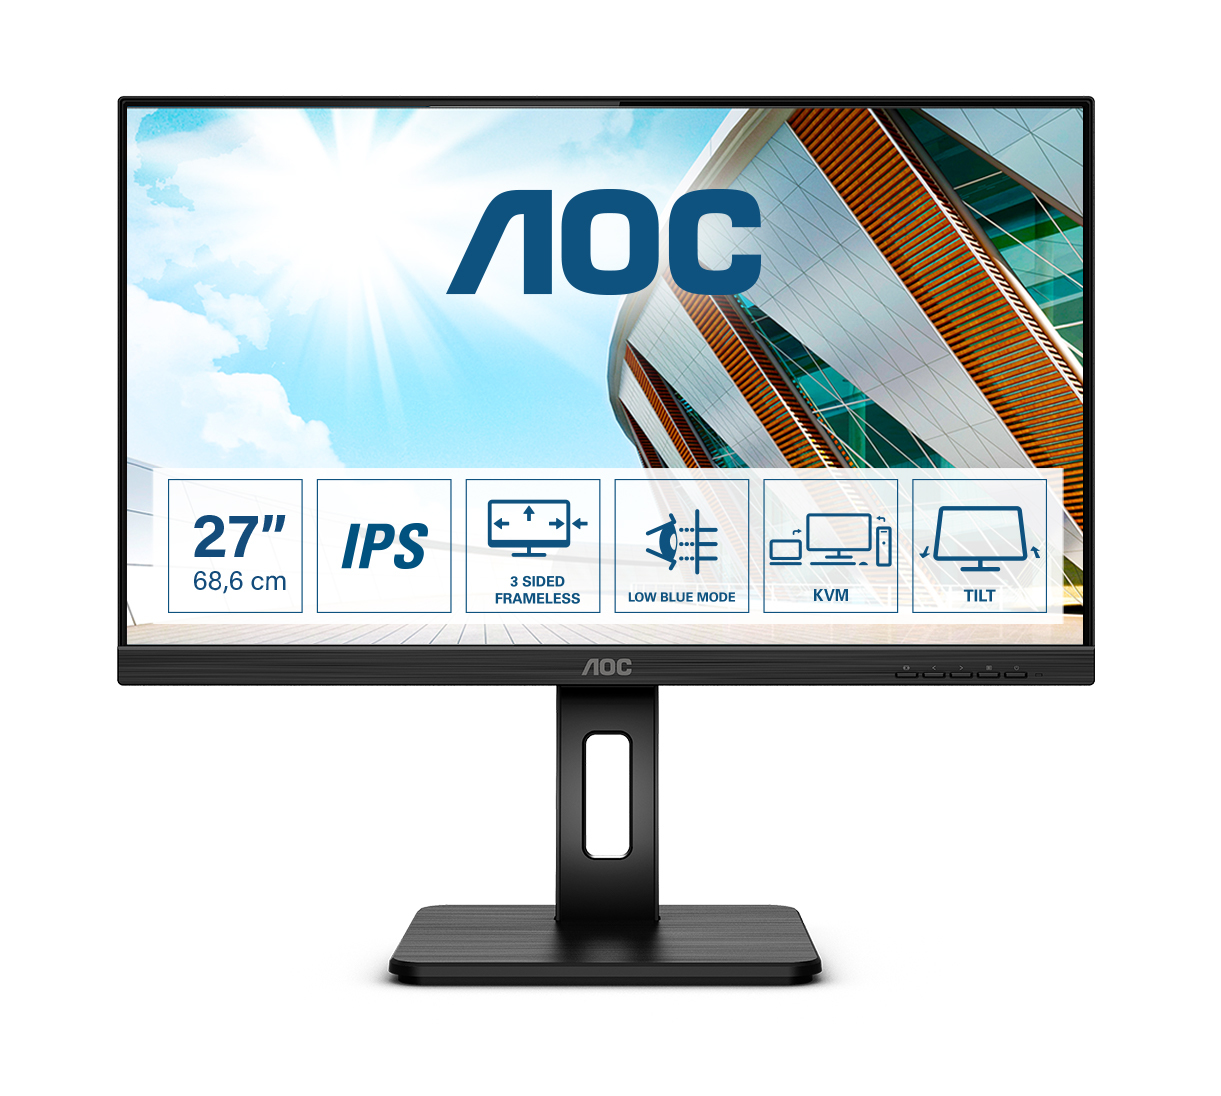 Screen size (inch) 27, Panel resolution 1920x1080, Refresh rate 75 Hz, Panel type IPS, USB-C connectivity USB-C 3.2 x 1 (DP alt mode, upstream, power delivery up to 65 W), HDMI HDMI 1.4 x 1, Display Port DisplayPort 1.2 x 1, Sync technology (VRR) Adaptive